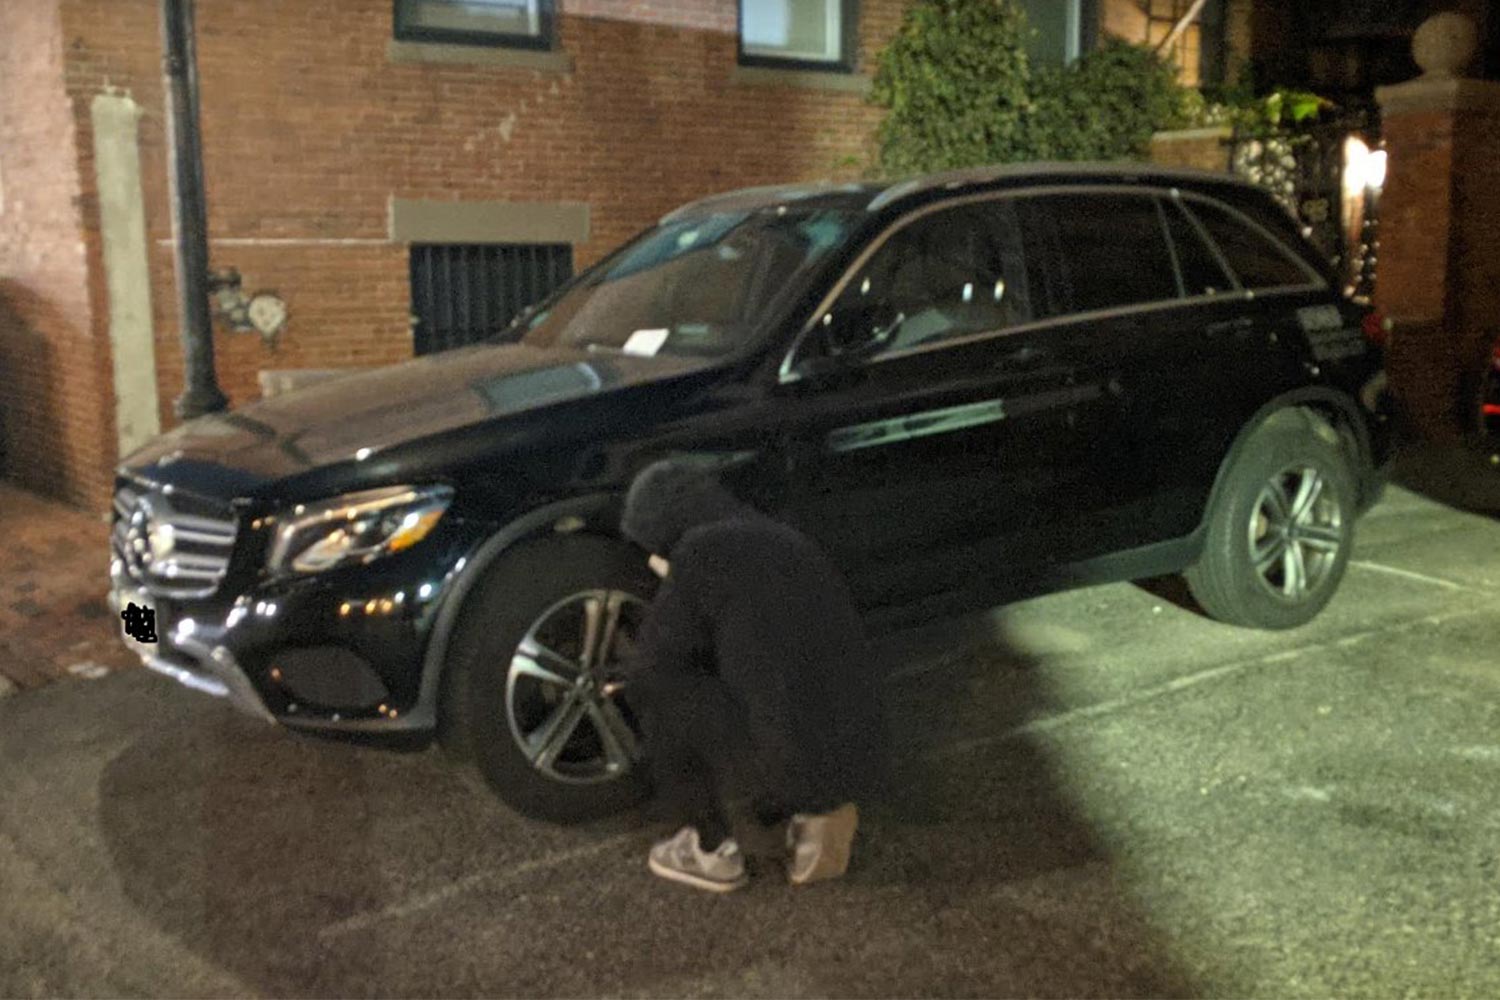 A photo of a person in black deflating the tires on an SUV in Boston, courtesy of Tyre Extinguishers on Twitter (@T_Extinguishers)